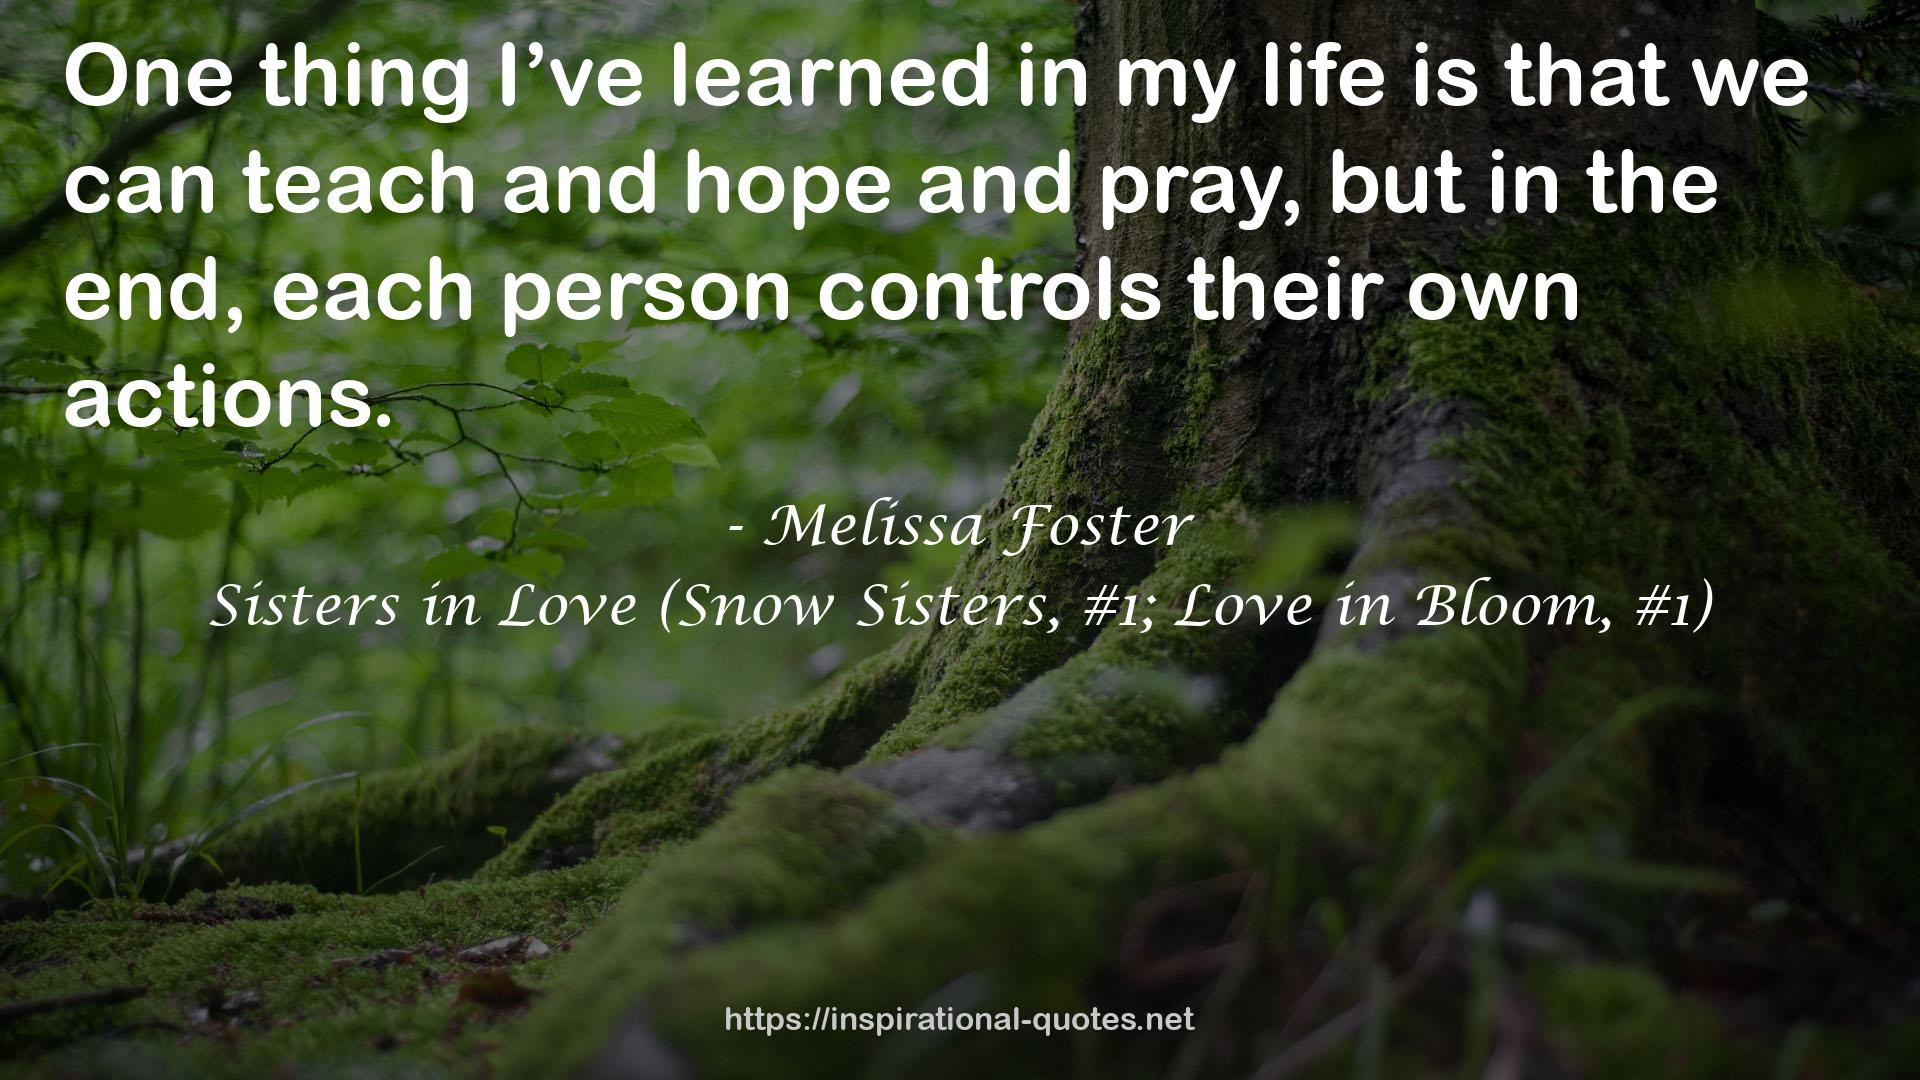 Sisters in Love (Snow Sisters, #1; Love in Bloom, #1) QUOTES